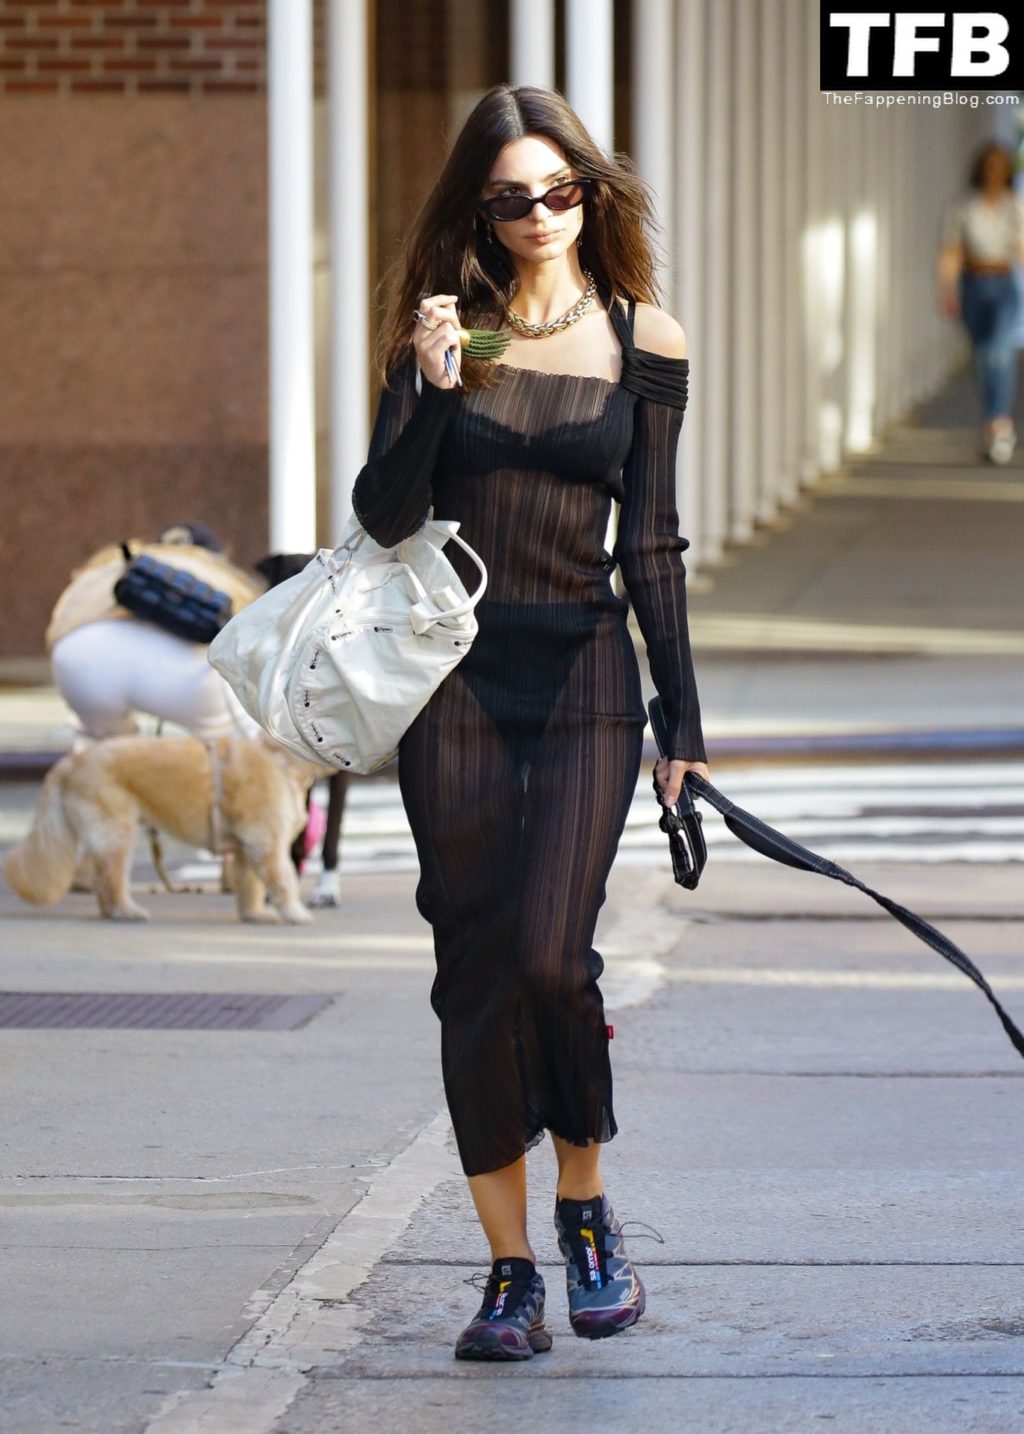 Emily Ratajkowski Sexy The Fappening Blog 9 2 1024x1434 - Emily Ratajkowski Bares It All in a See-Through Dress While Out Walking Her Dog in New York (33 Photos)